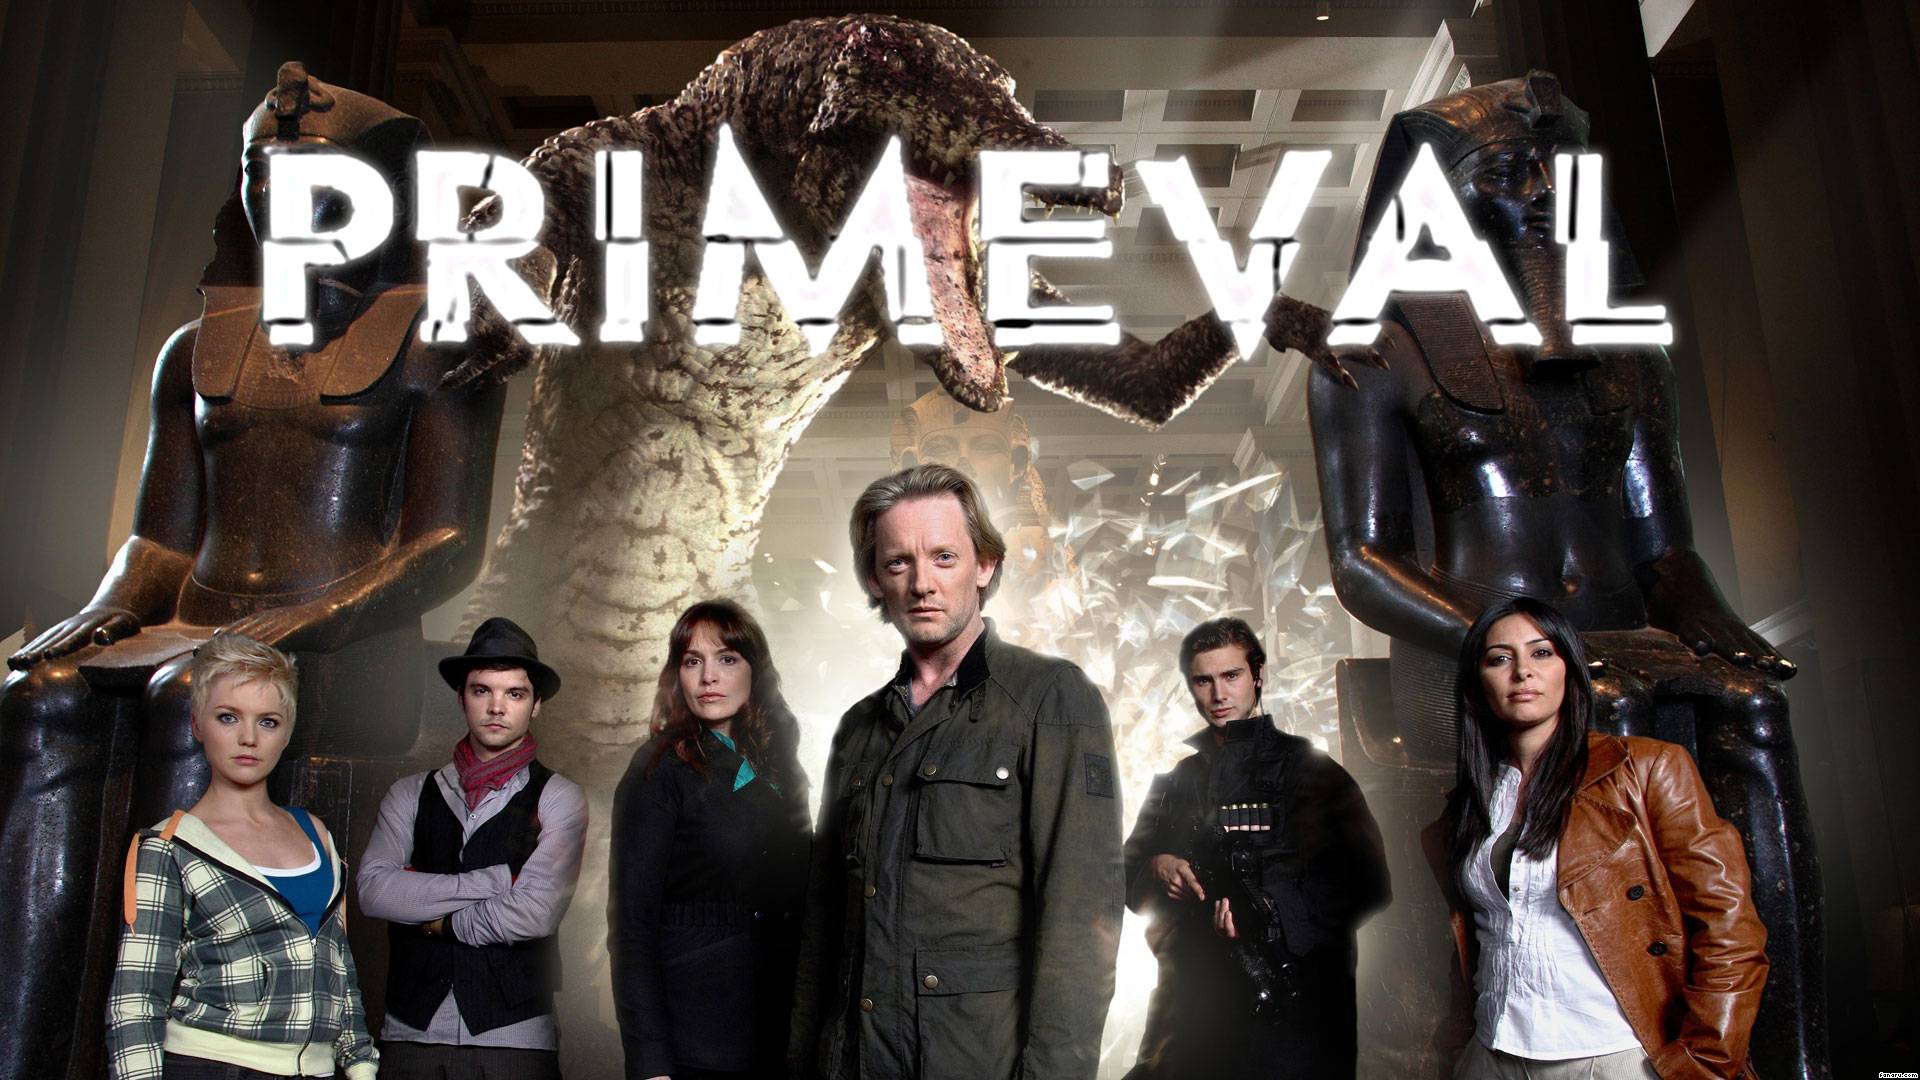 tv show, primeval, abby maitland, andrew lee potts, ben mansfield, claudia brown, connor temple, douglas henshall, hannah spearritt, hilary becker, laila rouass, lucy brown, nick cutter, sarah page